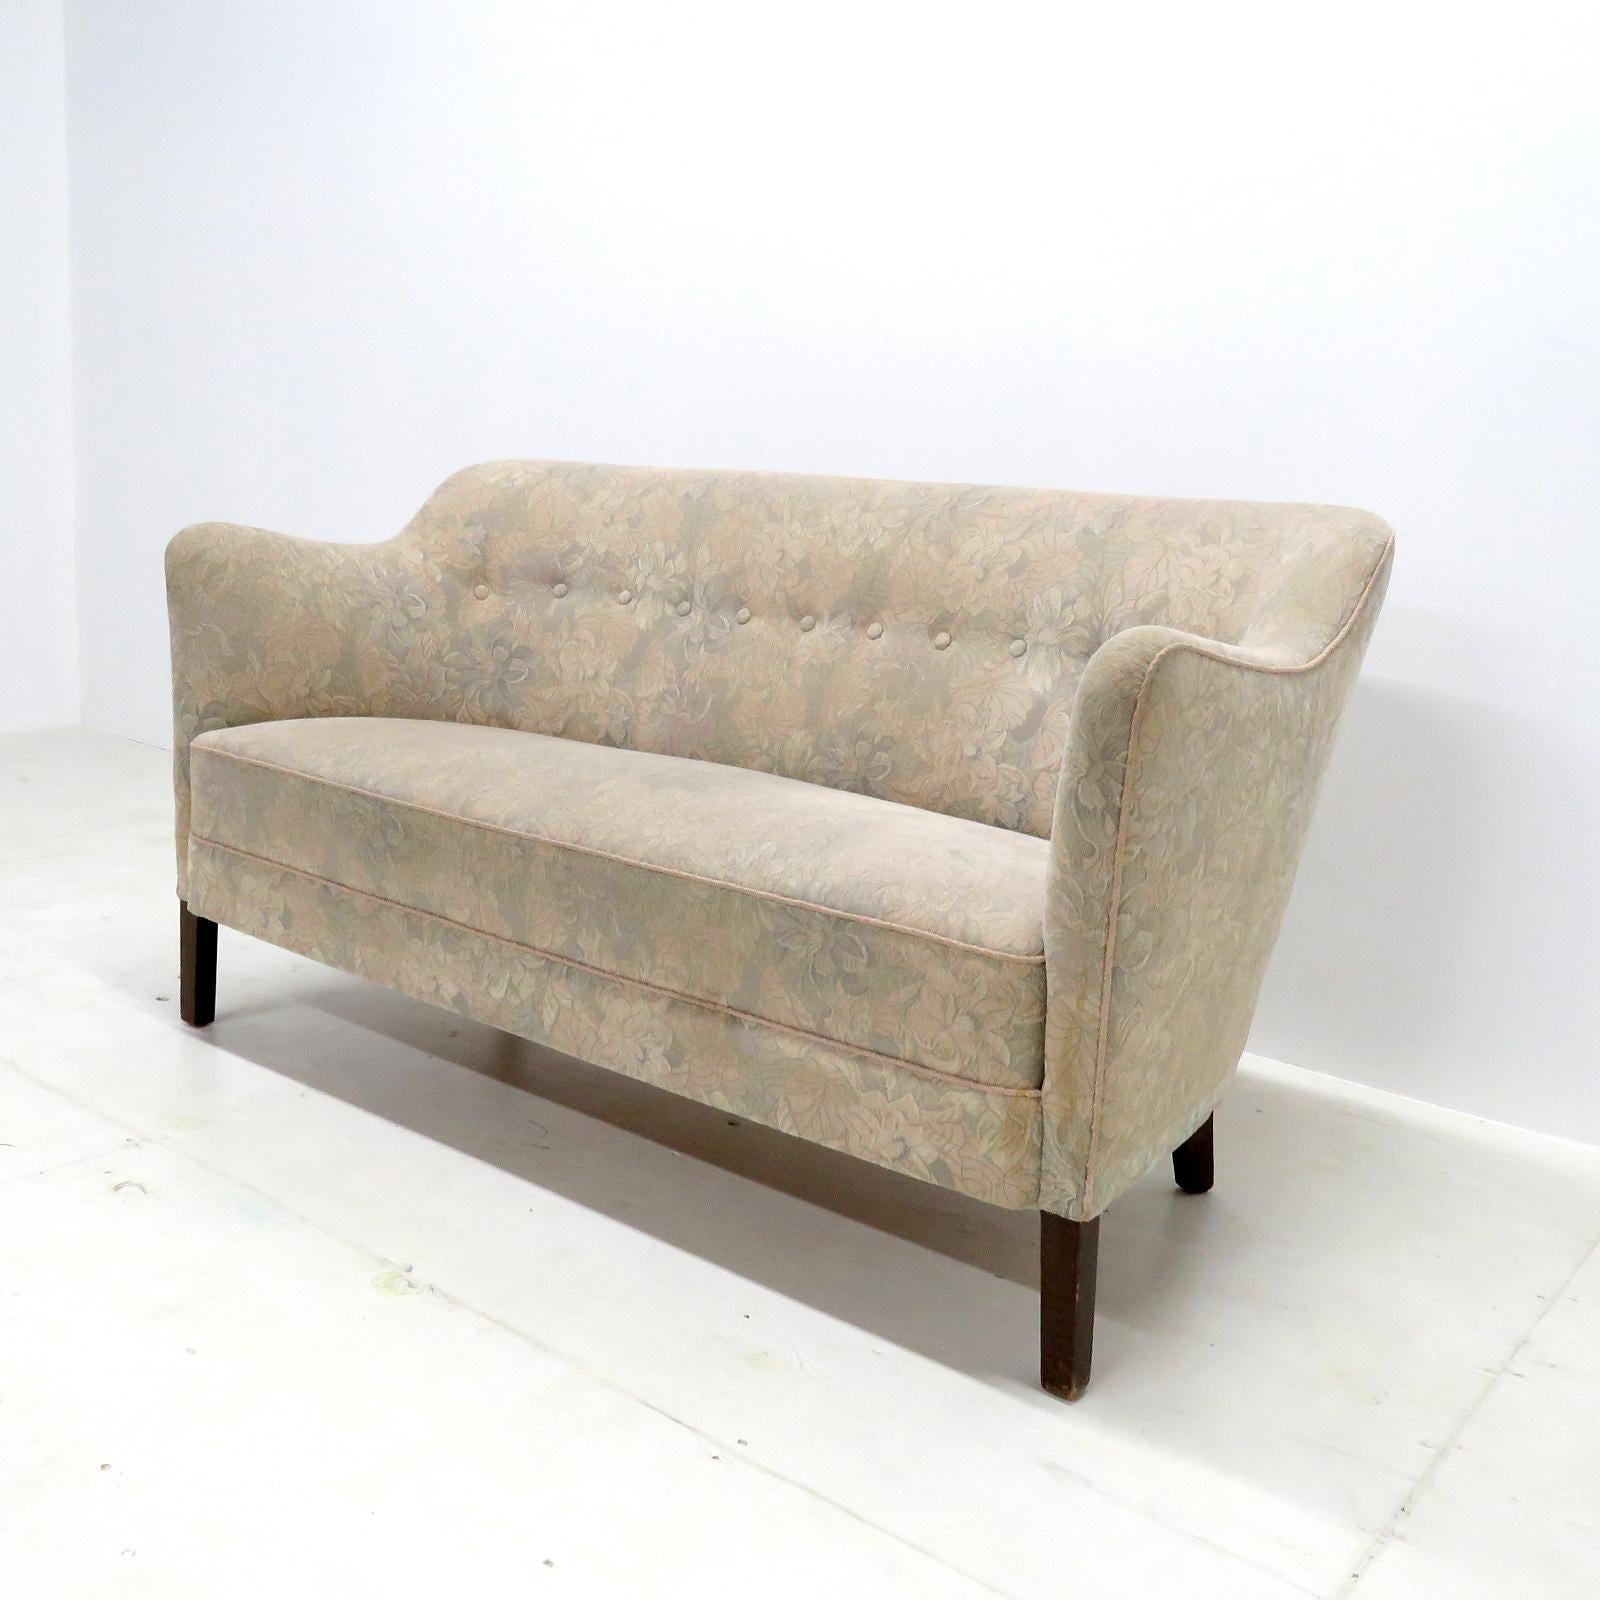 Stained Danish Modern Settee, 1940 For Sale